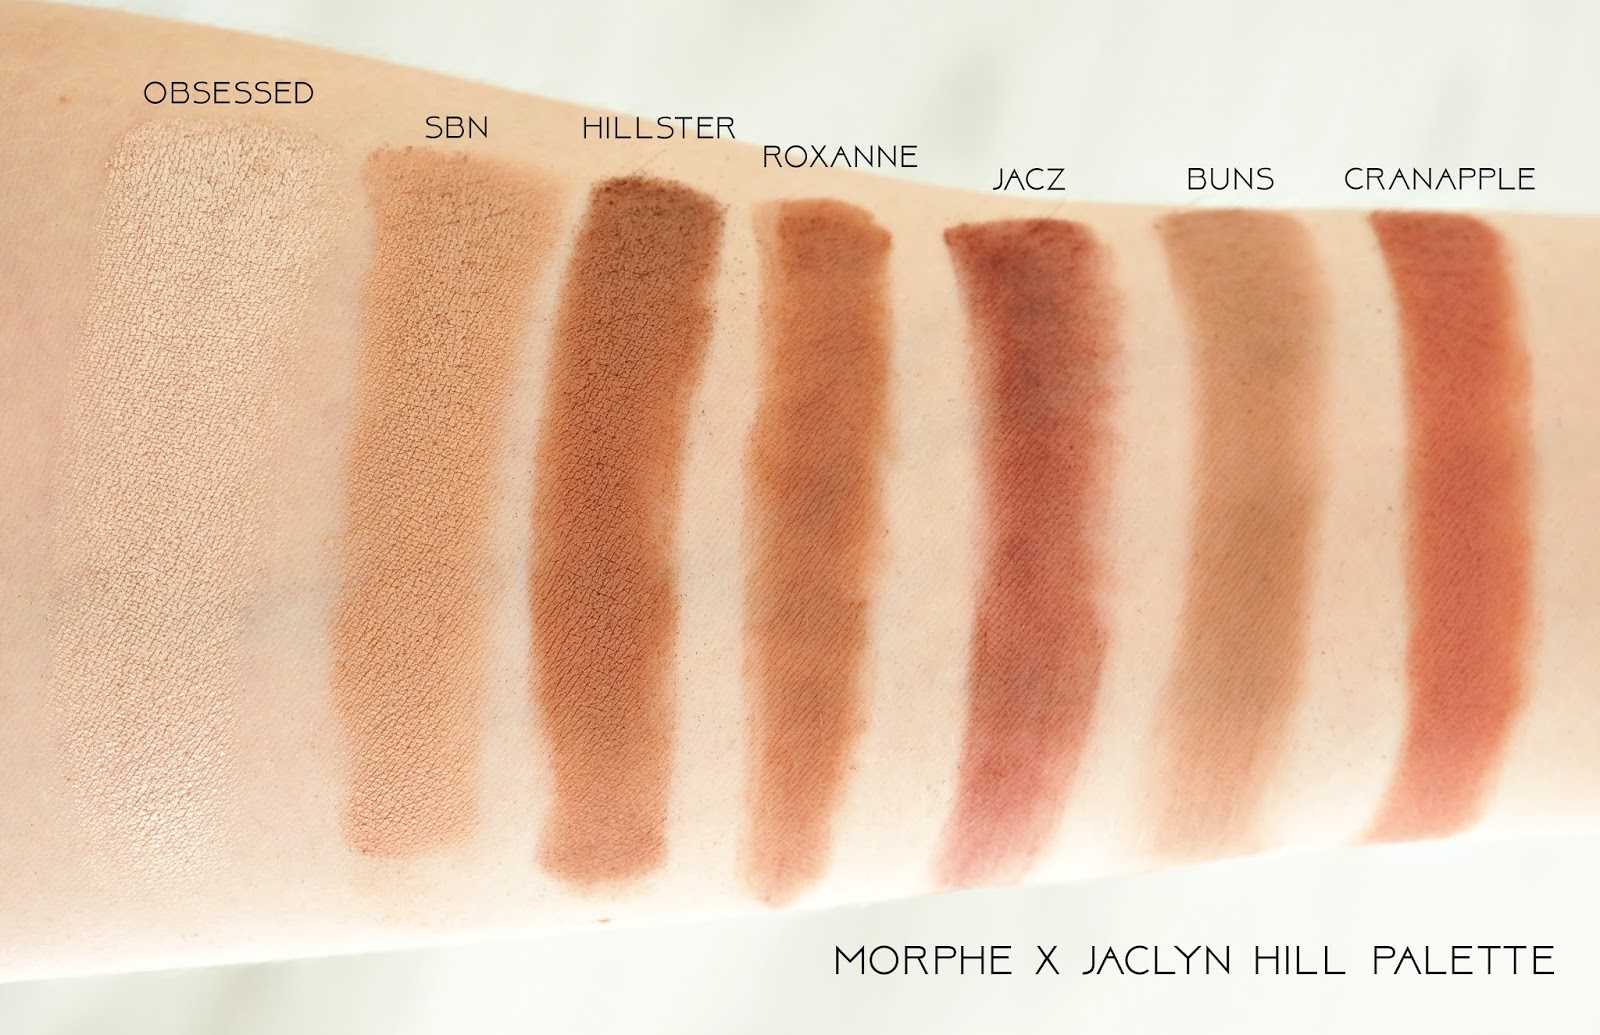 Morphe X Jaclyn Hill Eyeshadow Palette Swatches